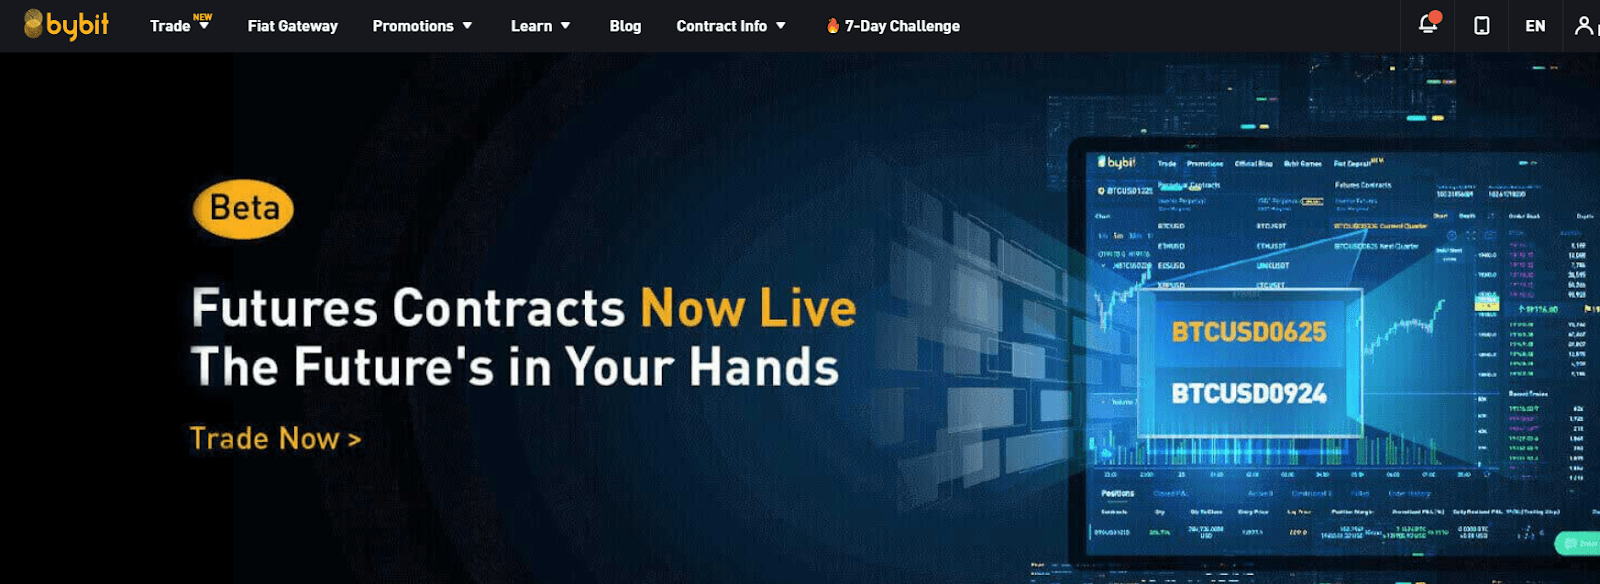 Bybit Futures Contracts